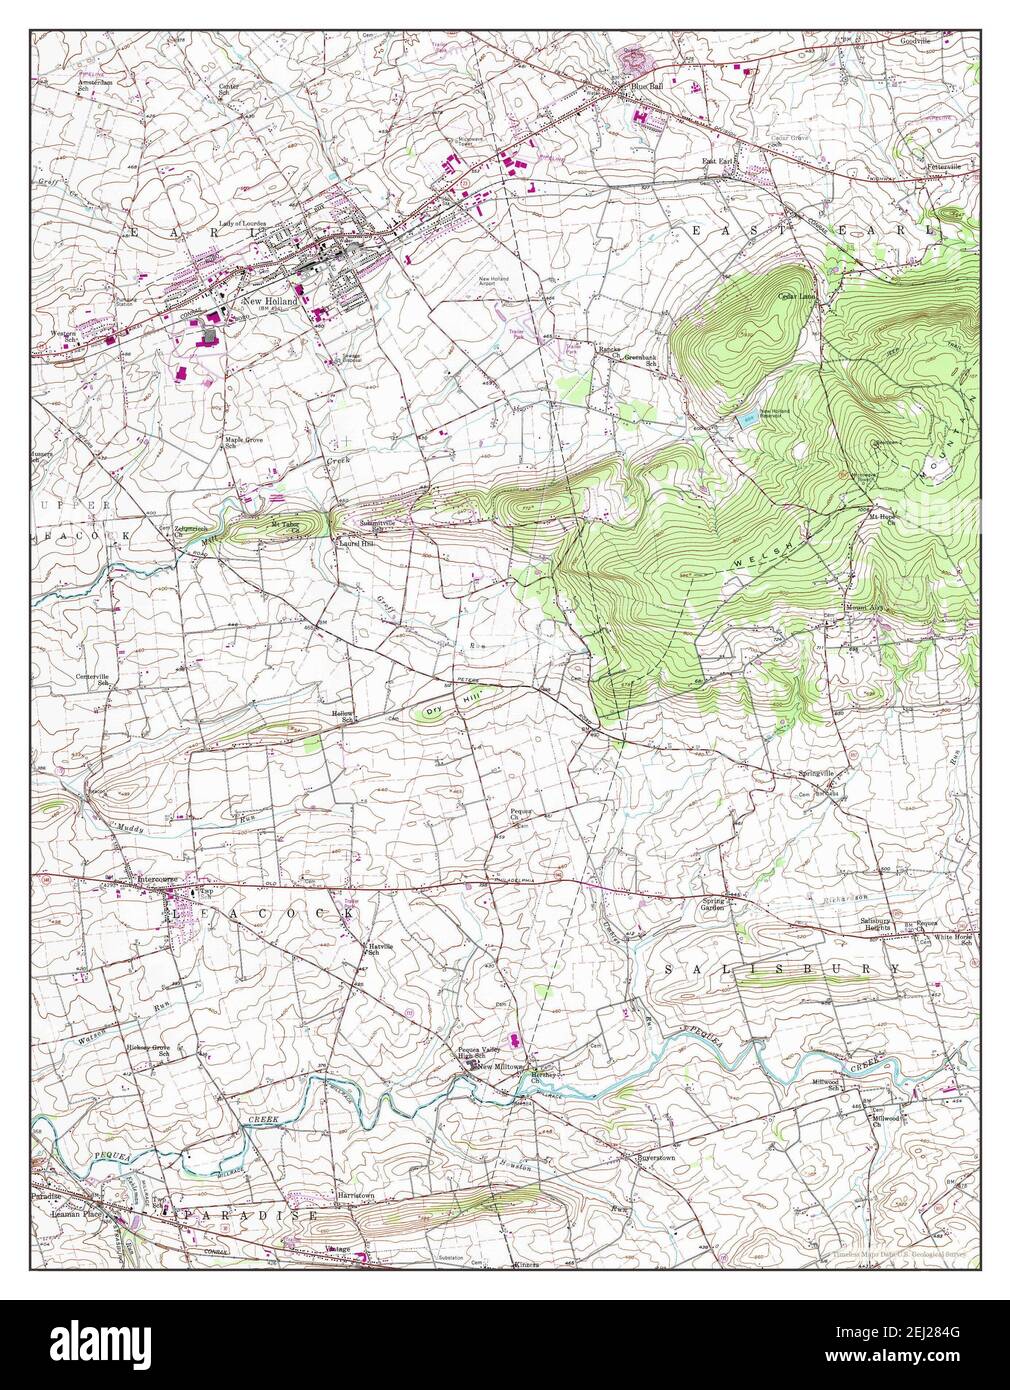 New Holland, Pennsylvania, map 1956, 1:24000, United States of America ...